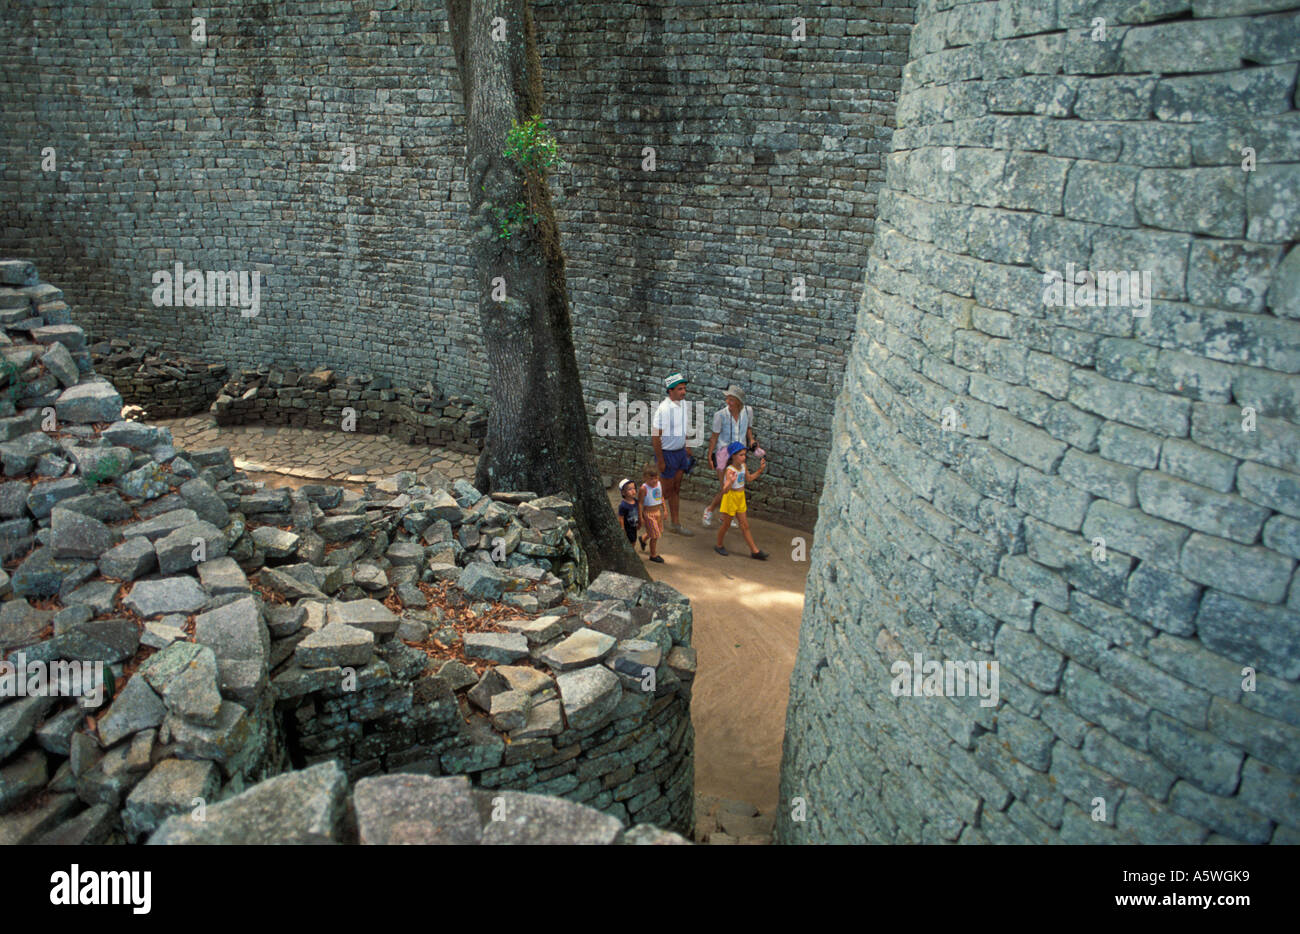 View of Tourists walking around the Great Enclosure near the Conical Tower at Great Zimbabwe National Monument, Zimbabwe, Africa Stock Photo